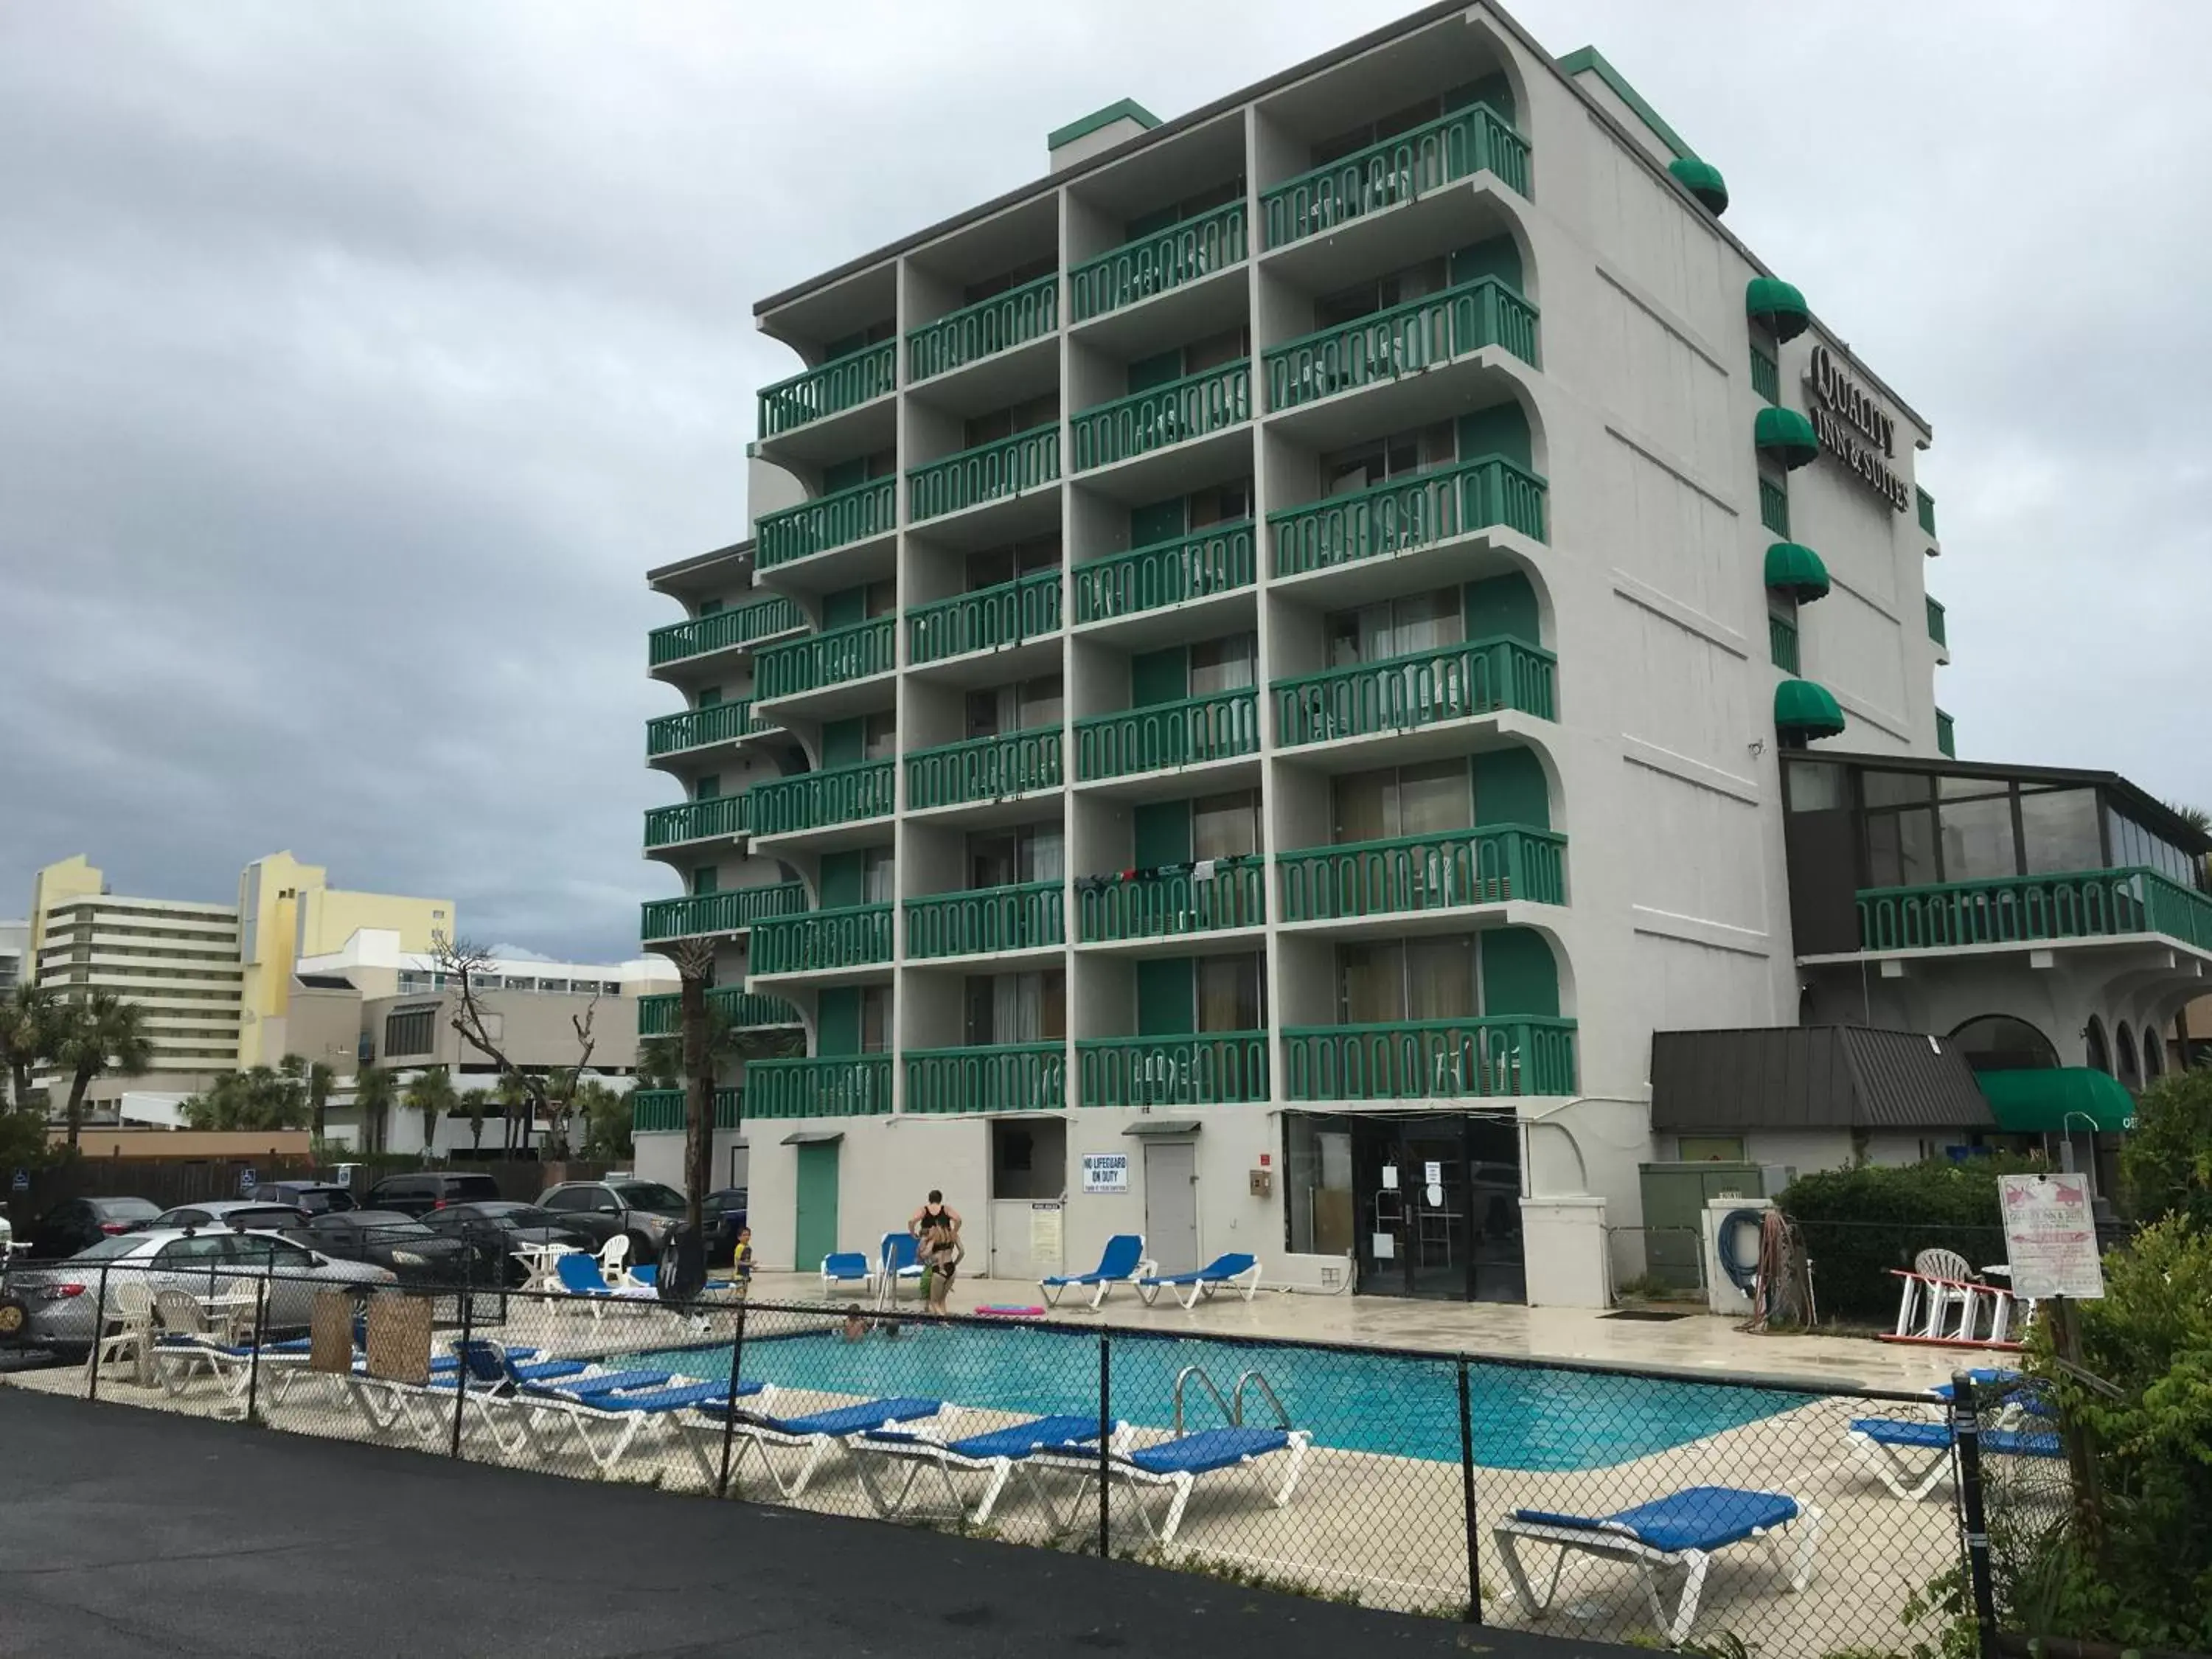 Property building, Swimming Pool in Quail Inn and Suites - Myrtle Beach